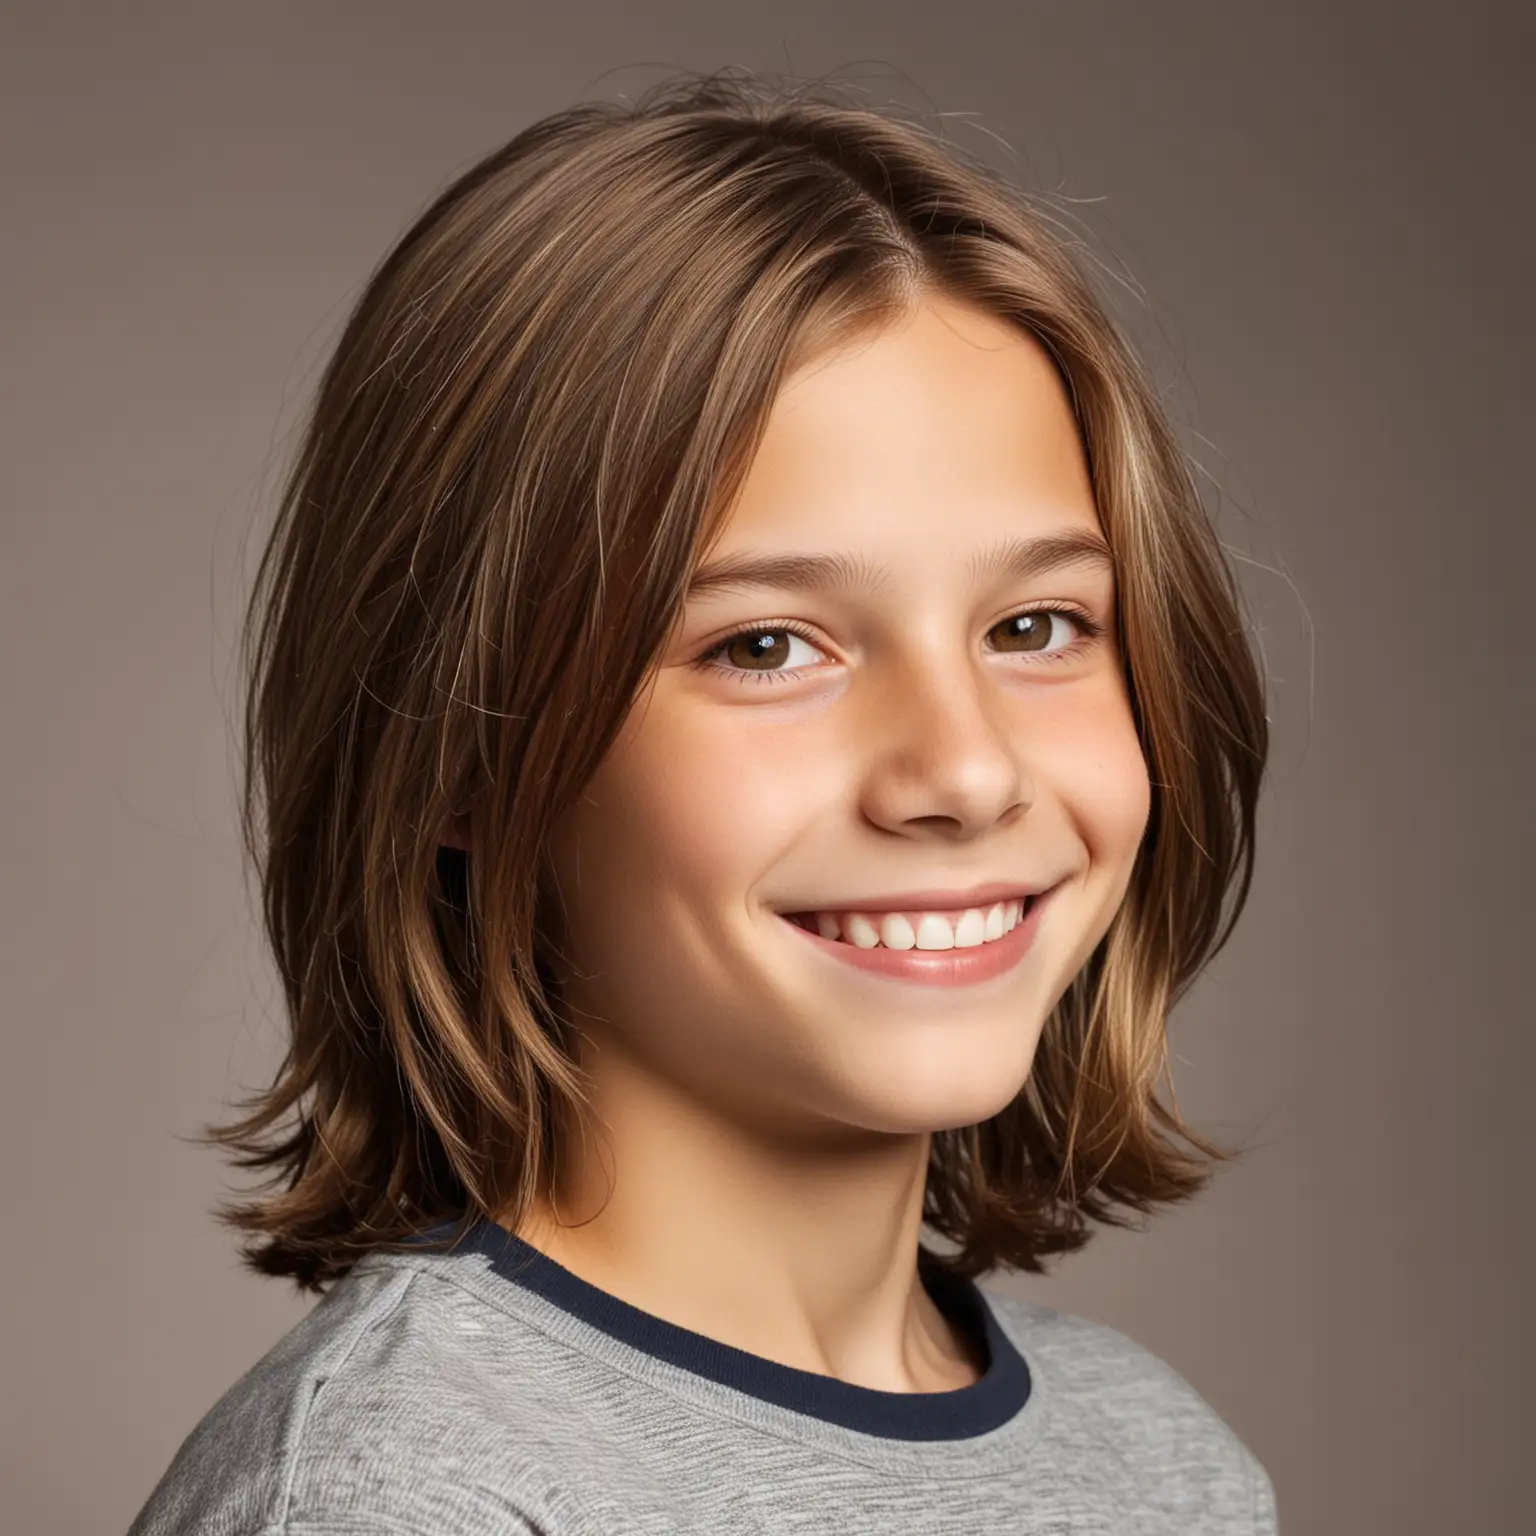 Portrait of Smiling TwelveYearOld Boy with Soft Shiny Brown Hair